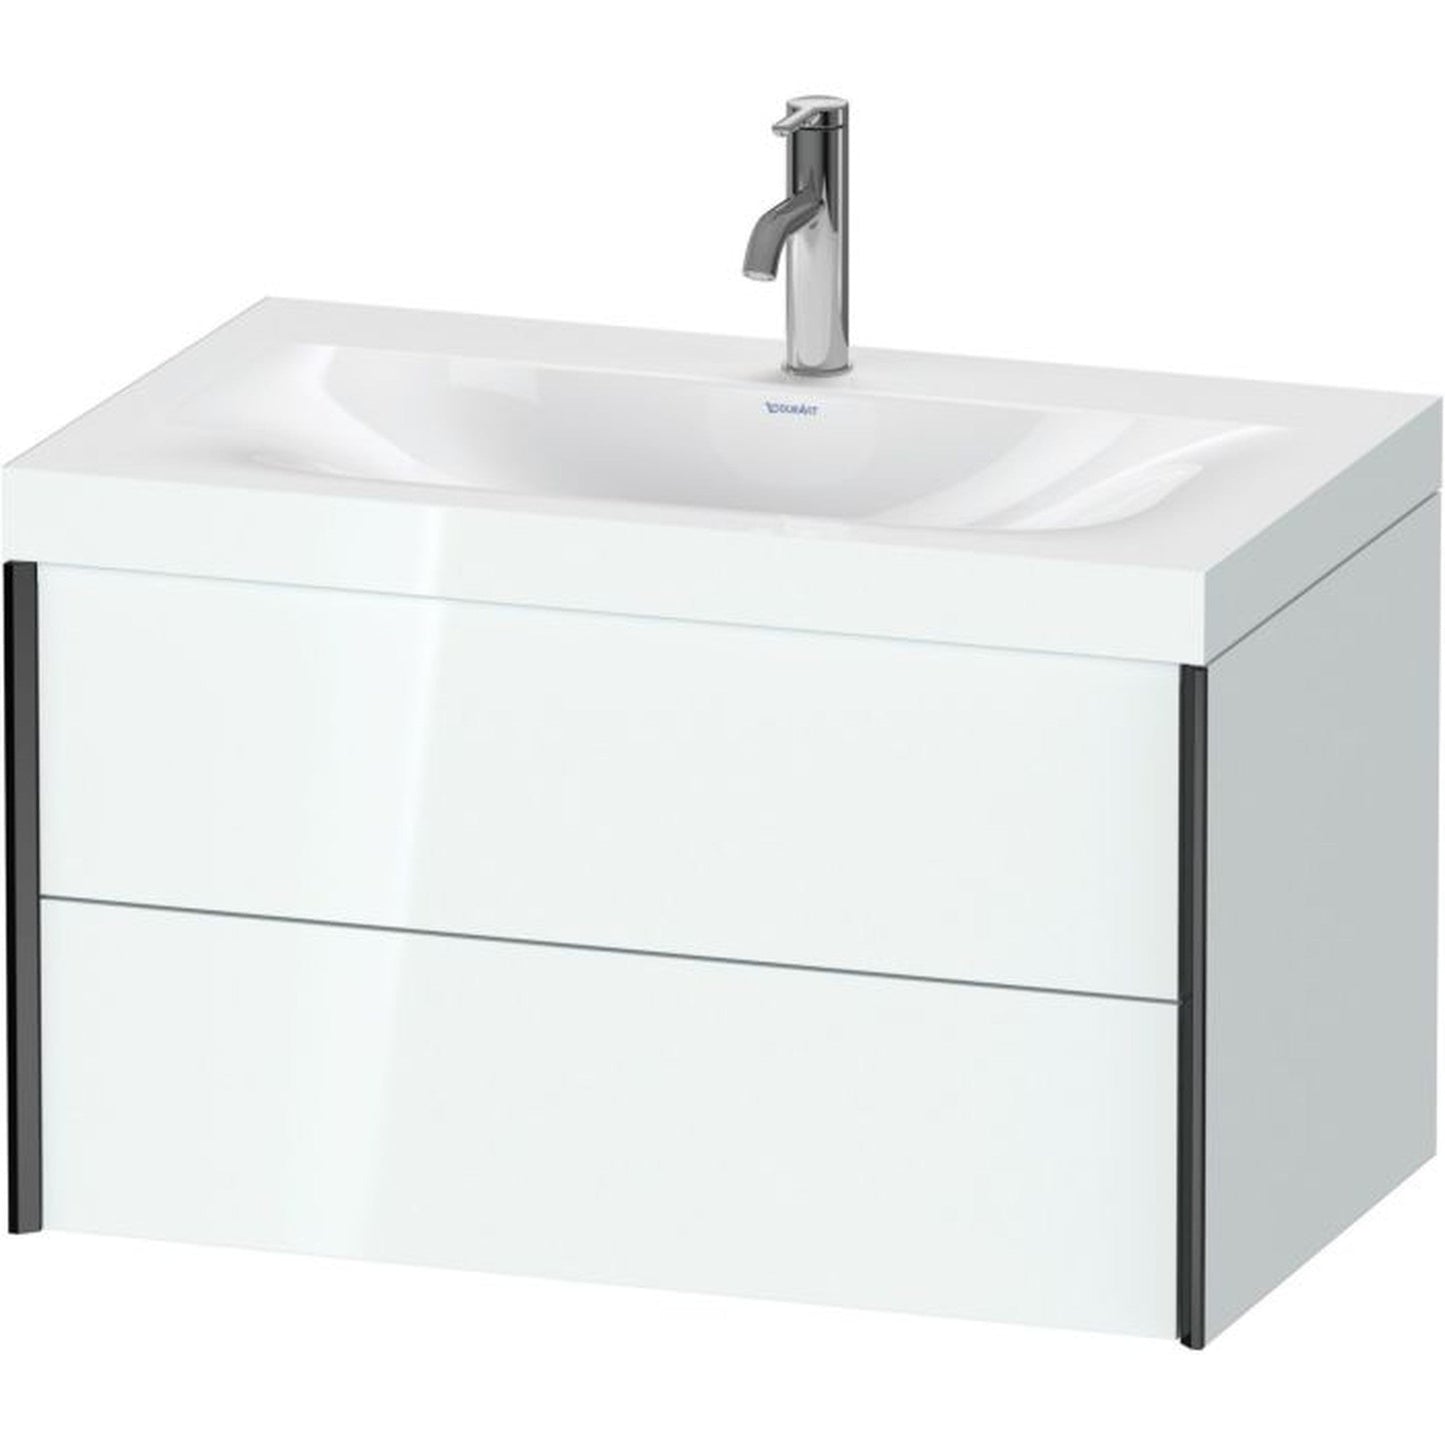 Duravit Xviu 31" x 20" x 19" Two Drawer C-Bonded Wall-Mount Vanity Kit With One Tap Hole, White (XV4615OB285C)